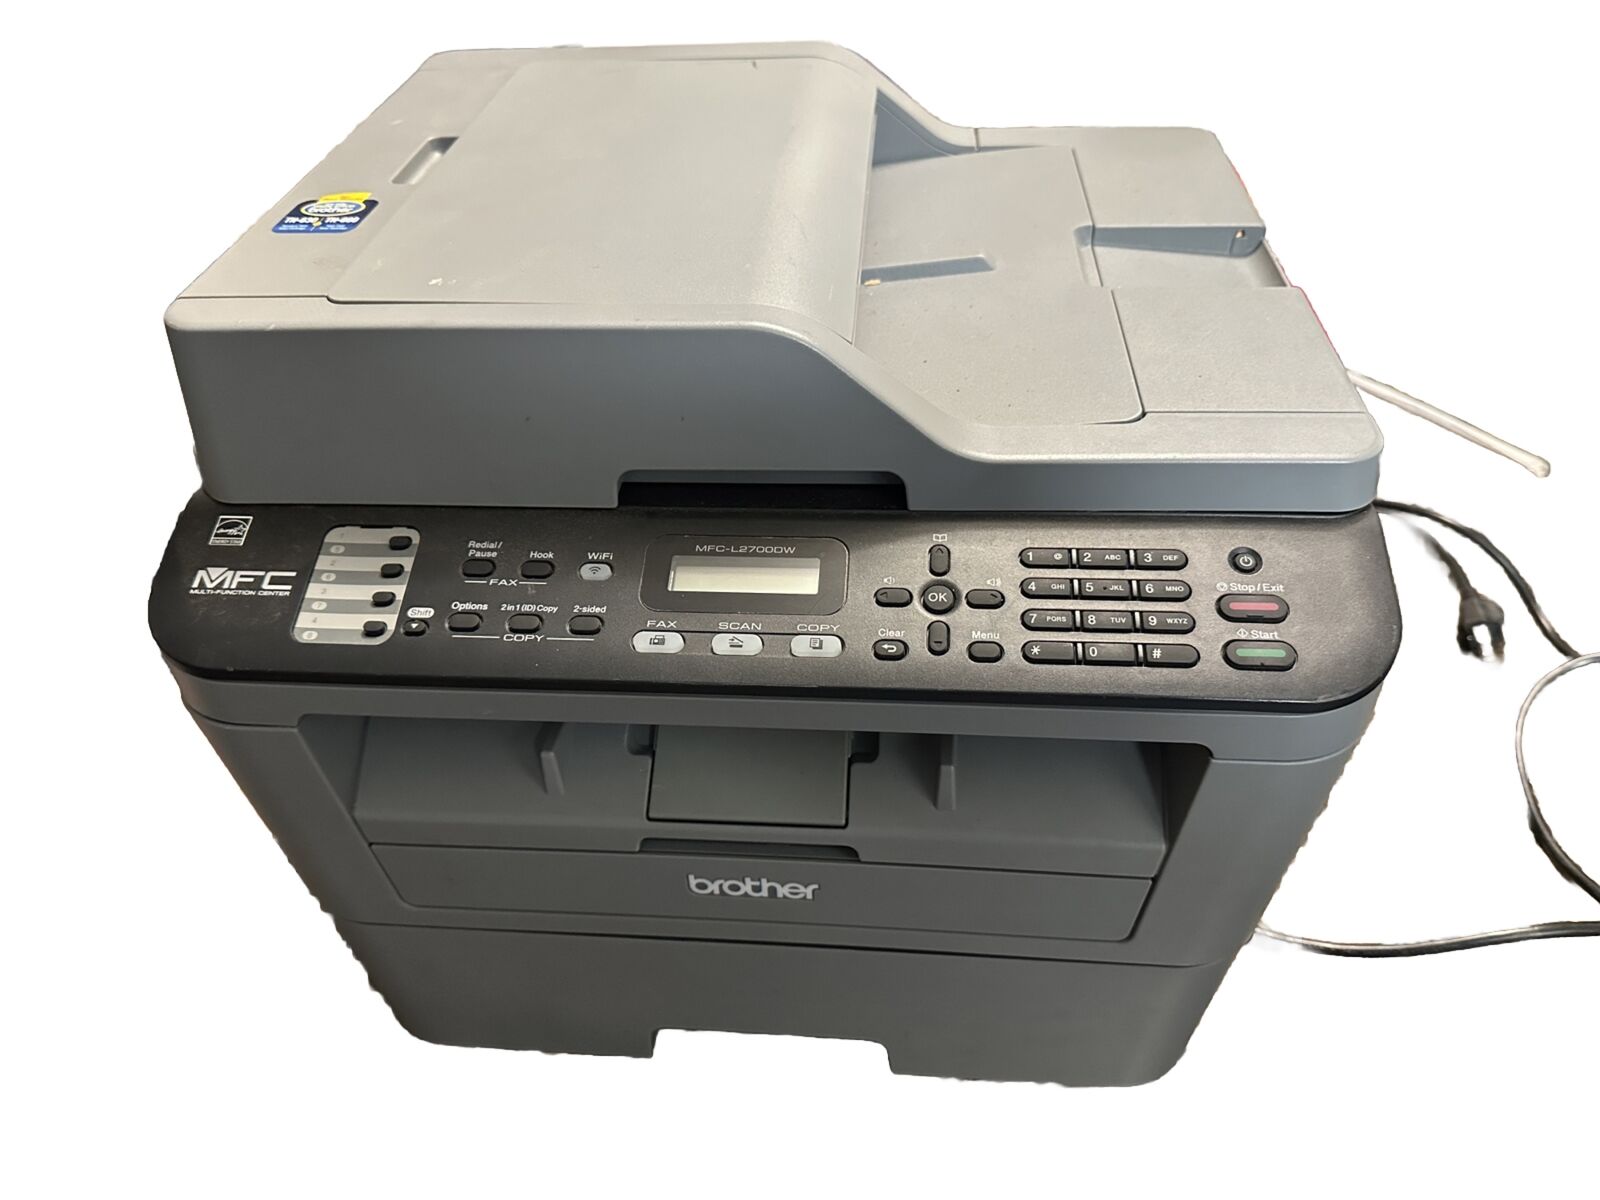 Brother MFC-L2700DW A-I-O Wireless Laser Printer, w/TONER, TESTED